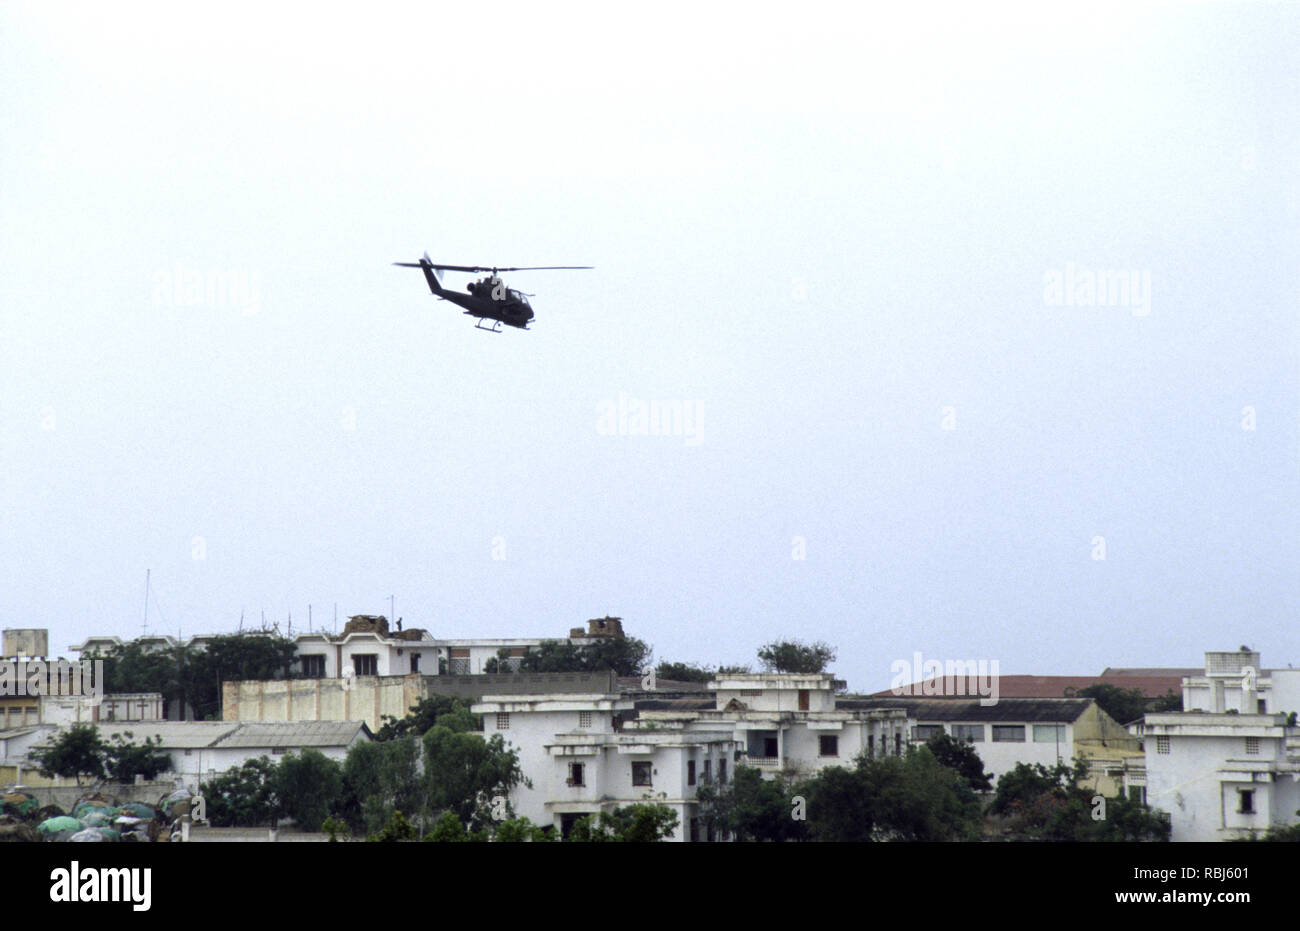 10th October 1993 A U.S. Army Bell AH-1 Cobra attack helicopter patrols low above the rooftops of Mogadishu, Somalia. Stock Photo